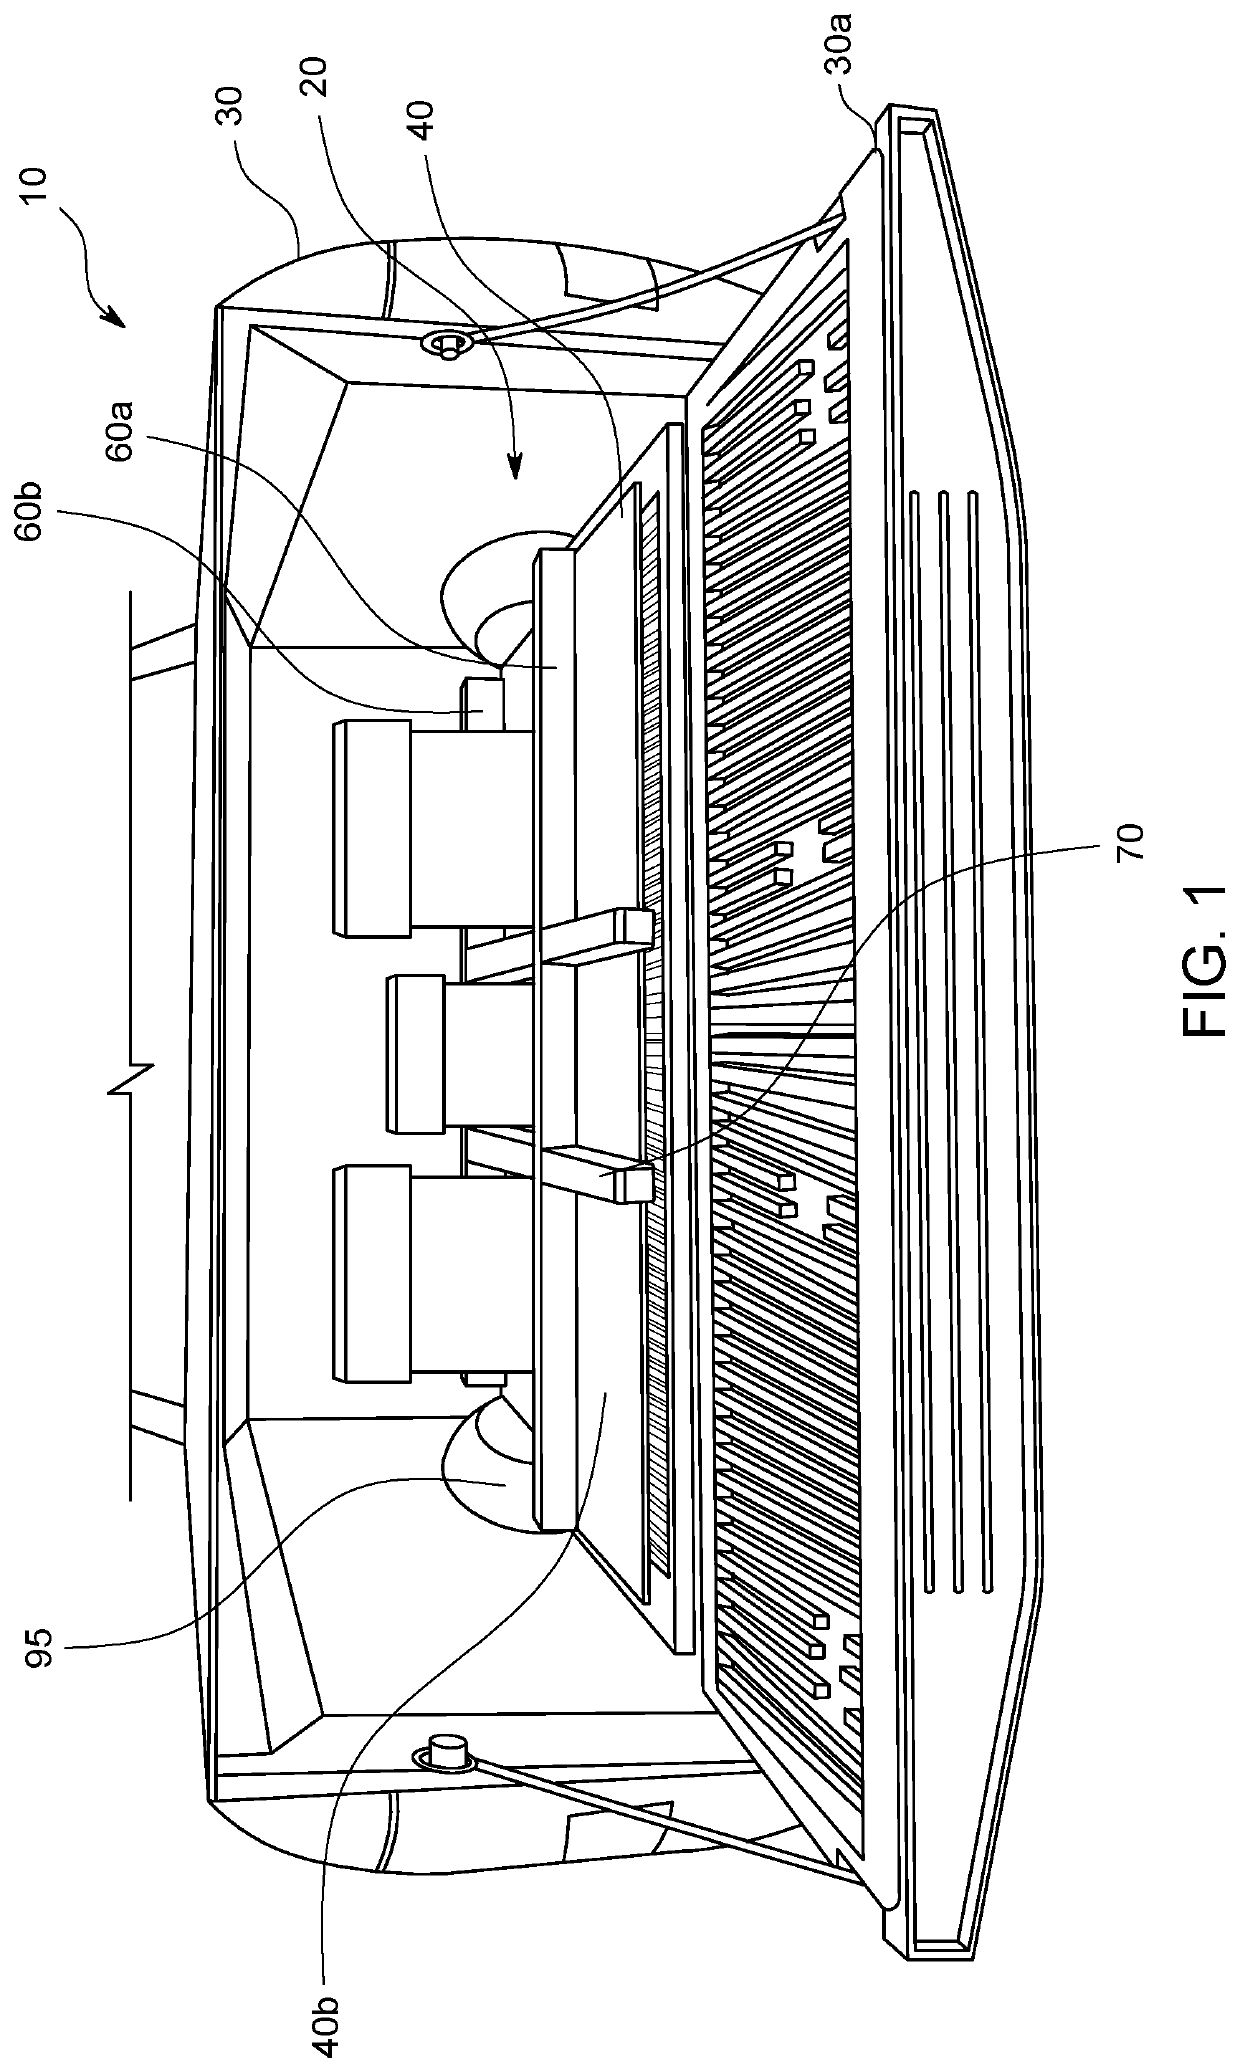 Cargo loading and unloading system in a vehicle